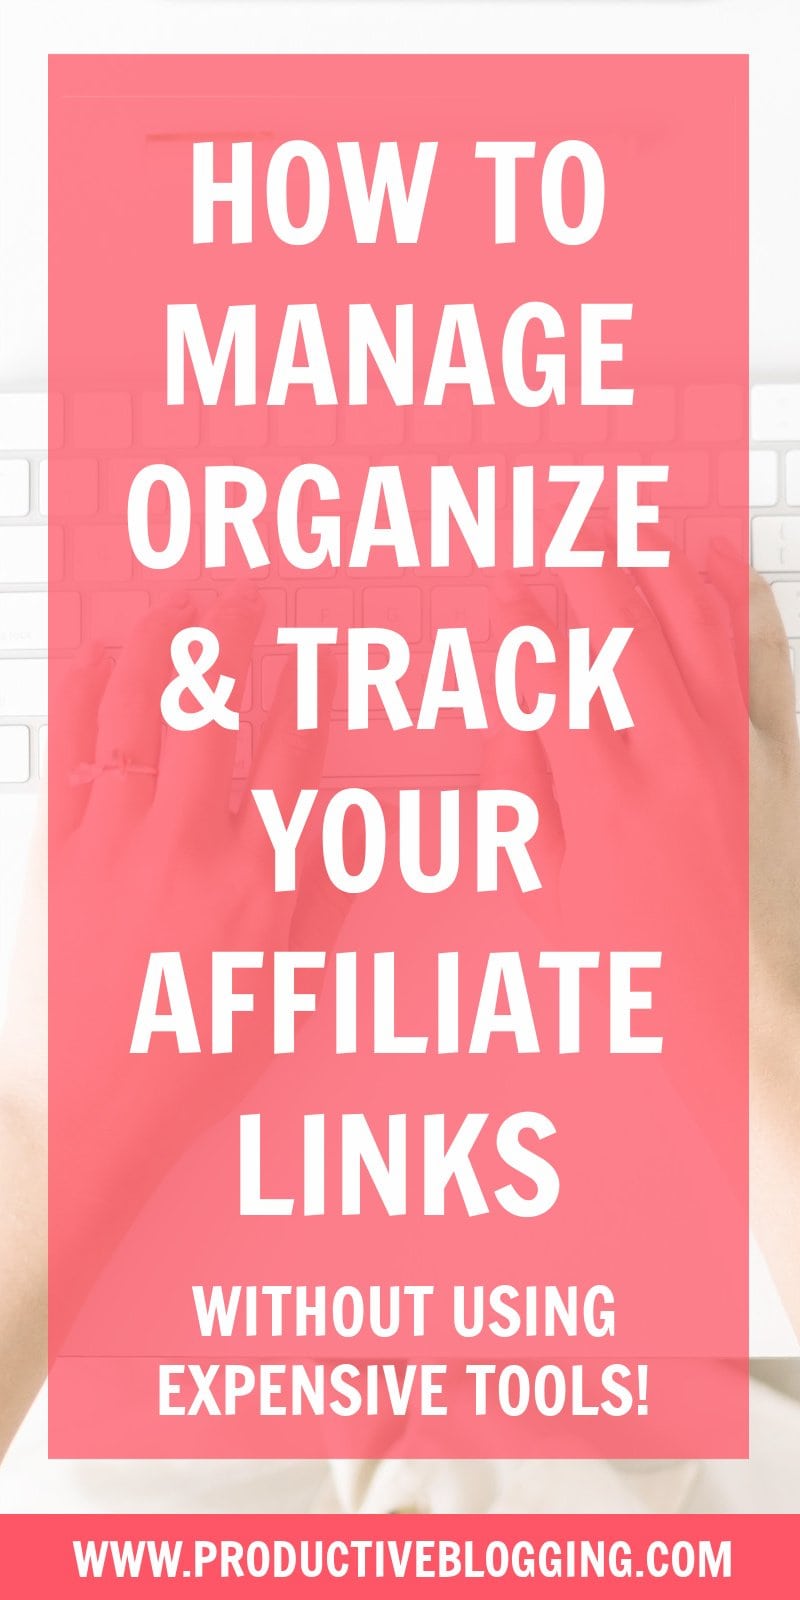 Are your affiliate links in a mess? Save time and earn more commission by organizing and managing your affiliate links better. Here’s how… #affiliatelinks #affiliatemarketing #affiliatecommission #affiliatetracking #affiliatemanagement #affiliateorganization #makemoneyblogging #monetizeyourblog #passiveincome #earnpassiveincome #passiveblogging #passiveincomeblogging #blogginglife #bloglife #professionalblogger#solopreneur #mompreneur #fempreneur #bloggingbiz #bloggingtips #productiveblogging